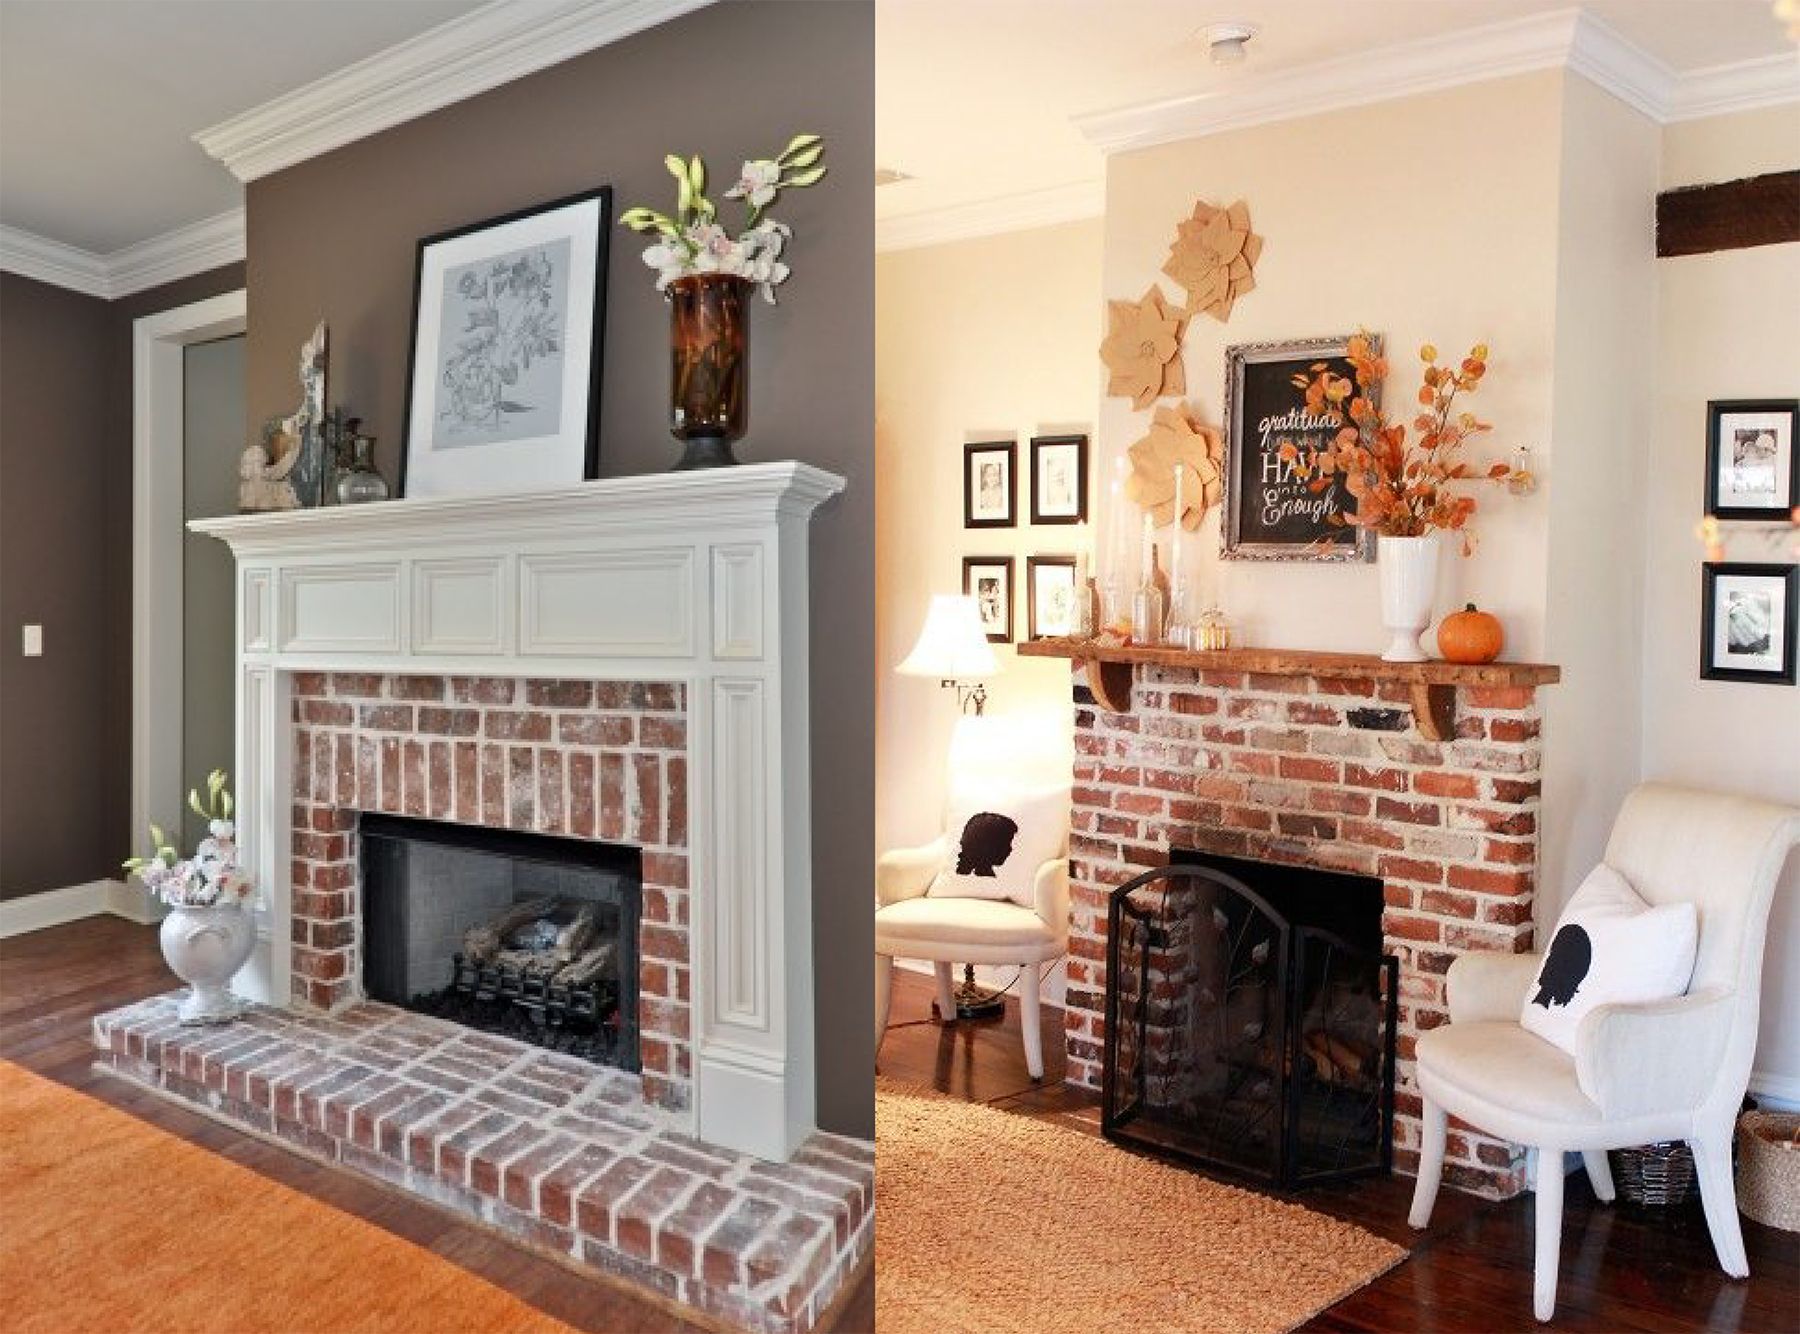 Build Your Own Fireplace Inspirational Exposed Brick Fireplace Almond Home In 2019